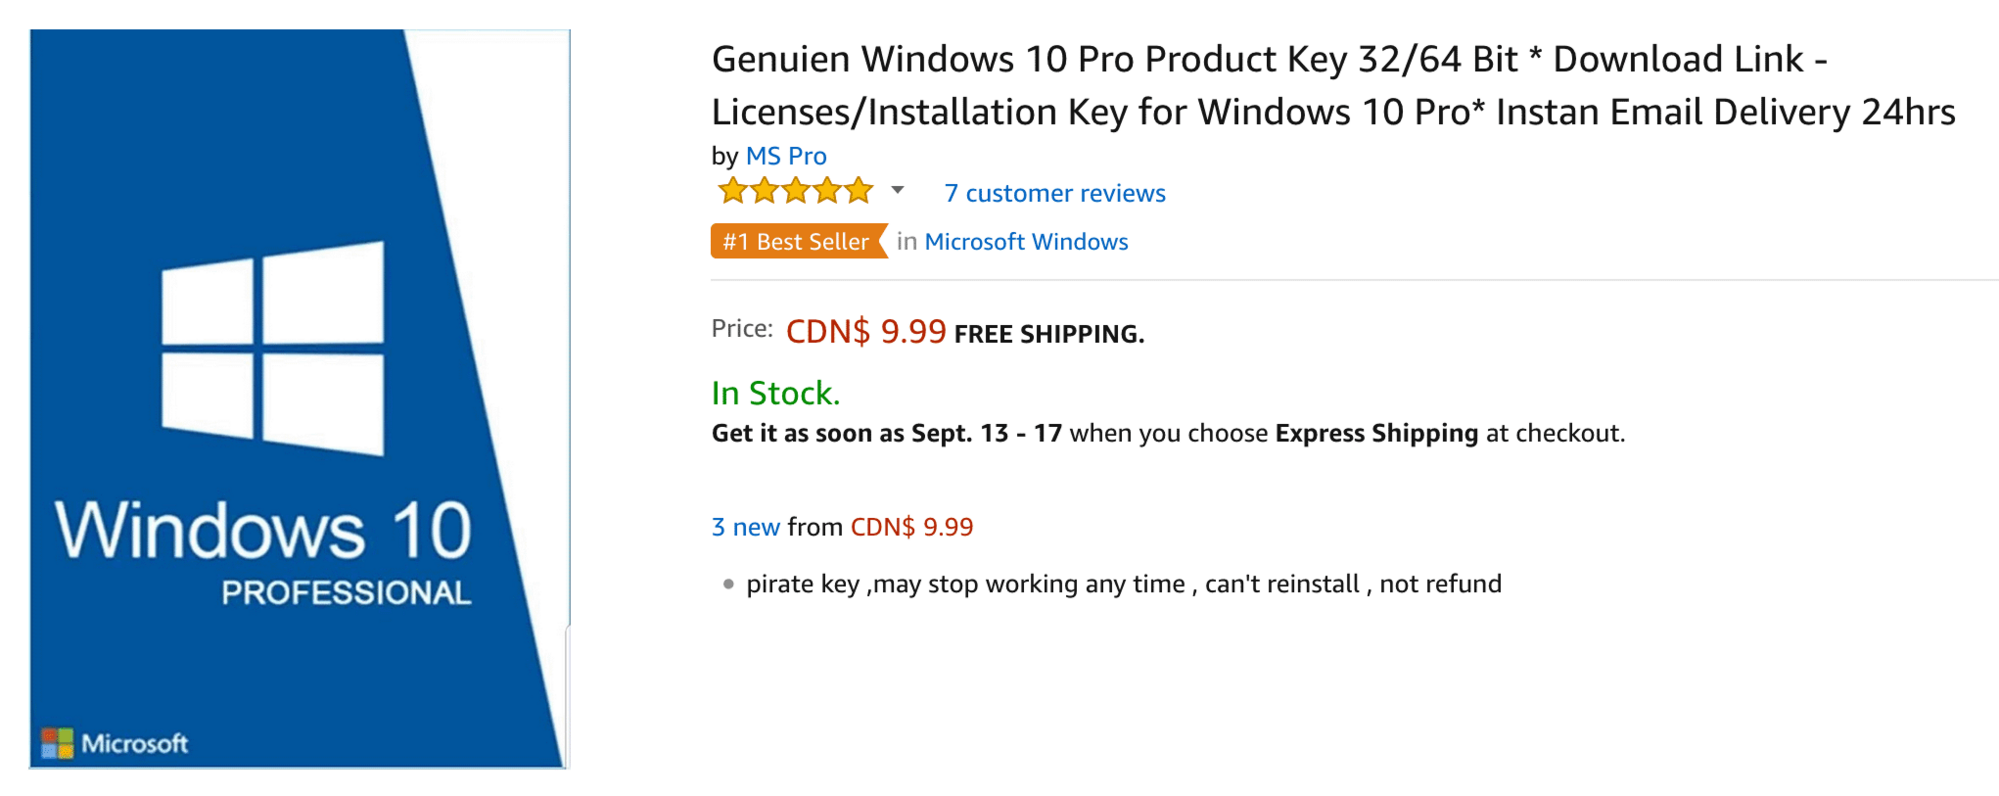 Cheapo Windows Licenses Openly Sold As “Pirate Keys” On Amazon.Ca | Ctrl  Blog